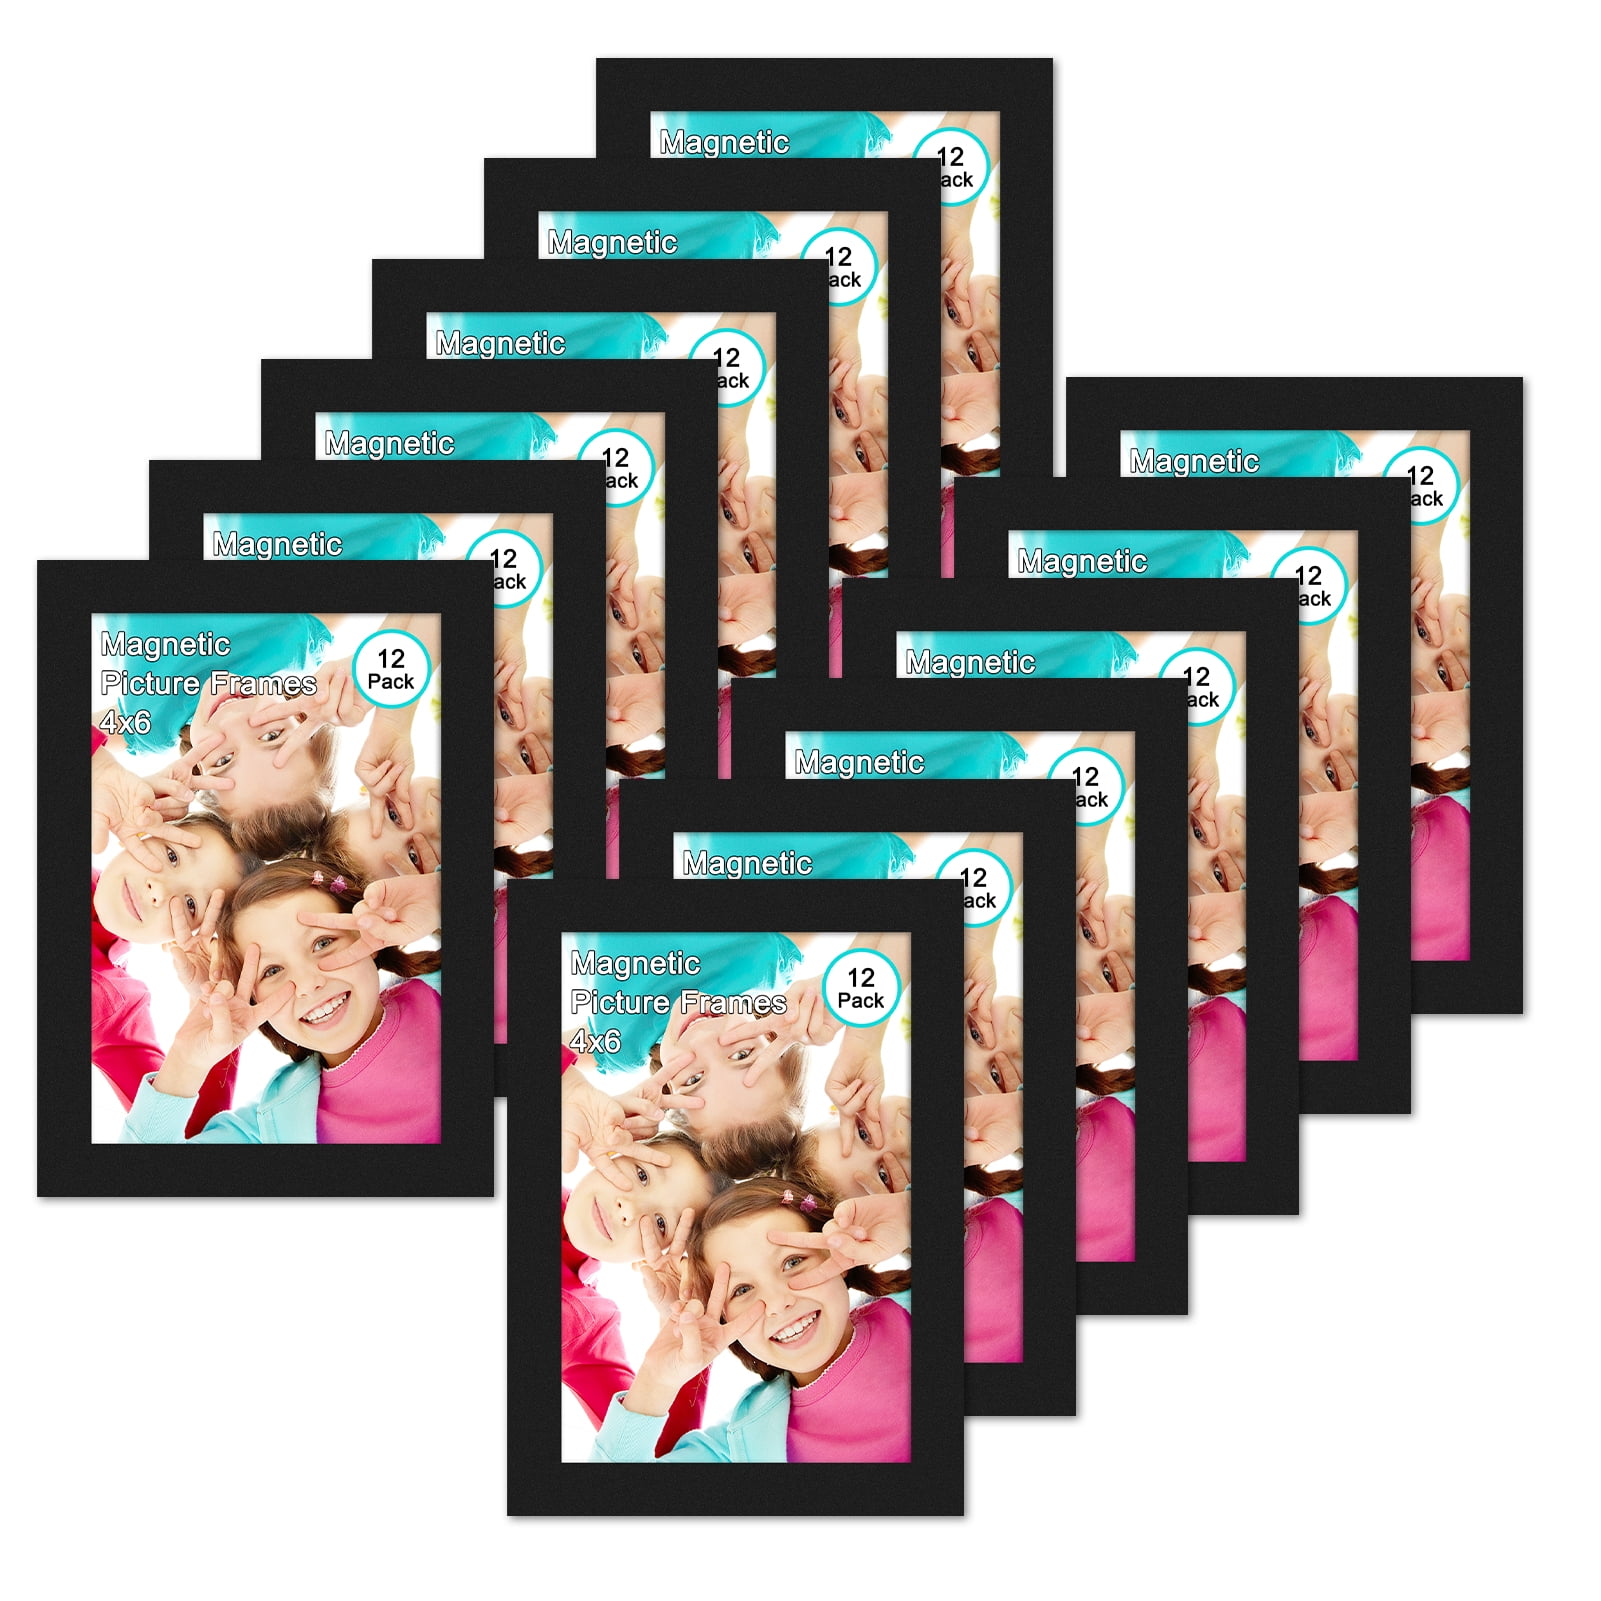  Dduolammng Magnetic Black Picture Frames,4 x 6 inch